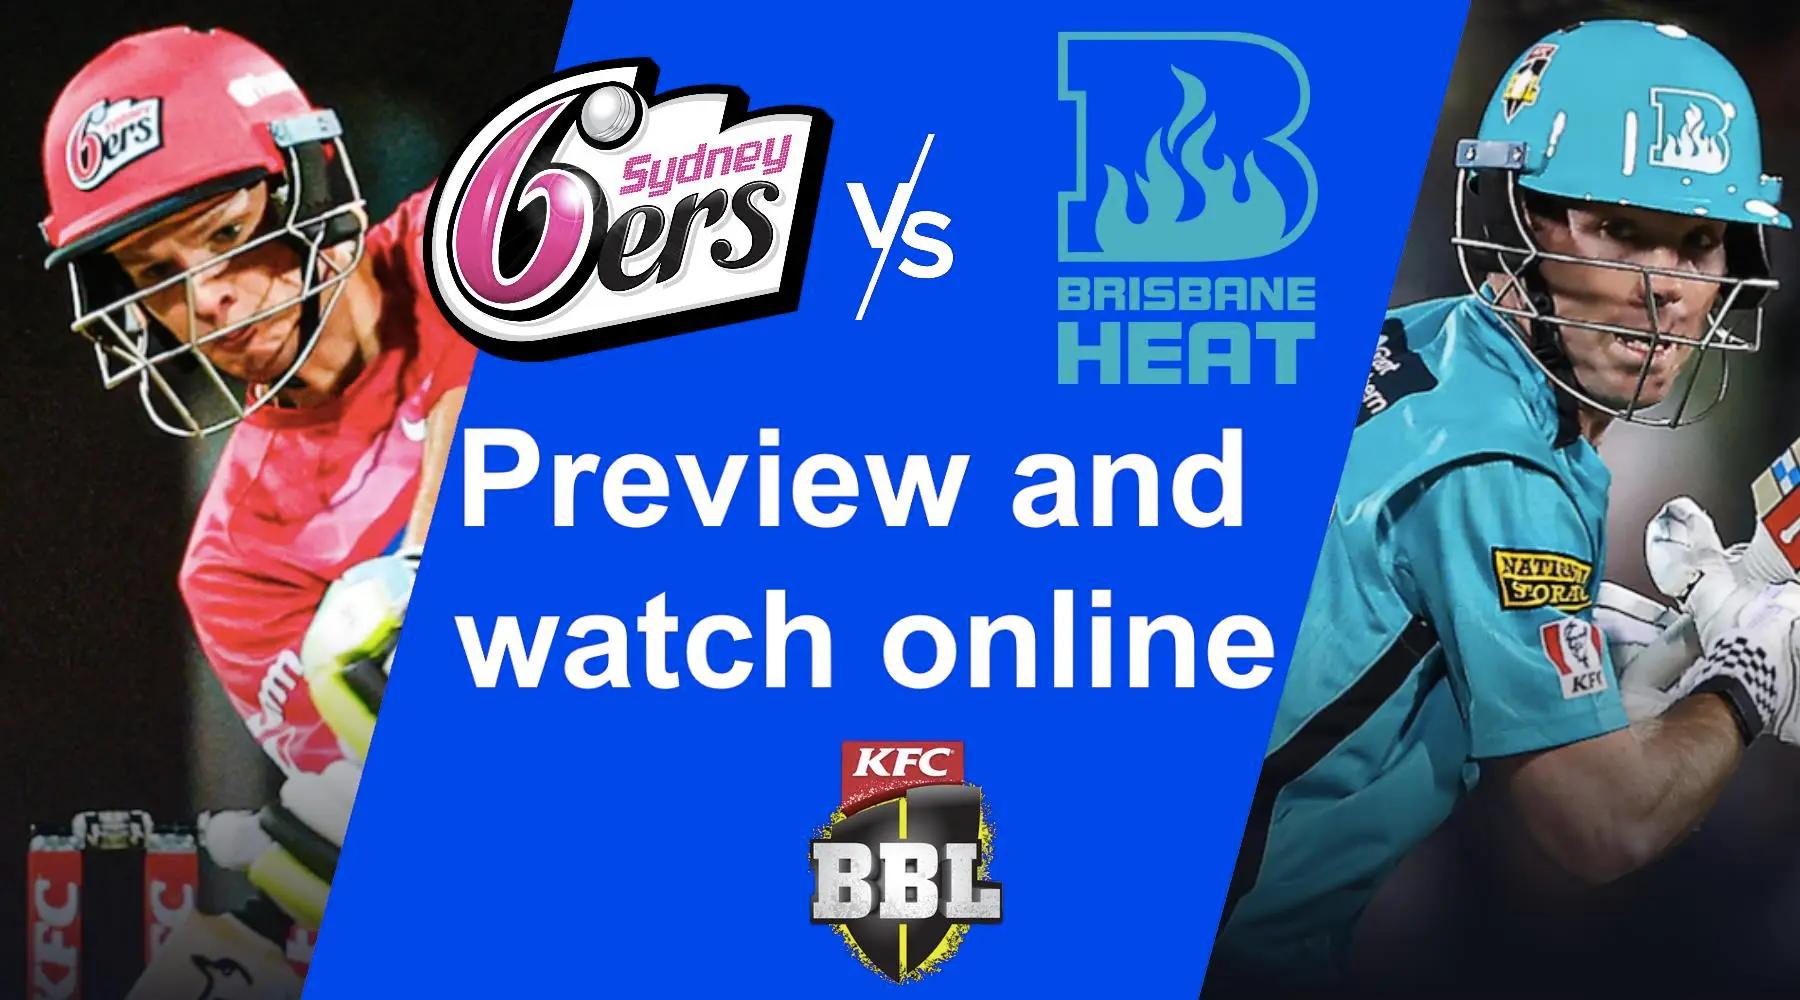 How to watch Sydney Sixers vs Brisbane Heat BBL live and match preview